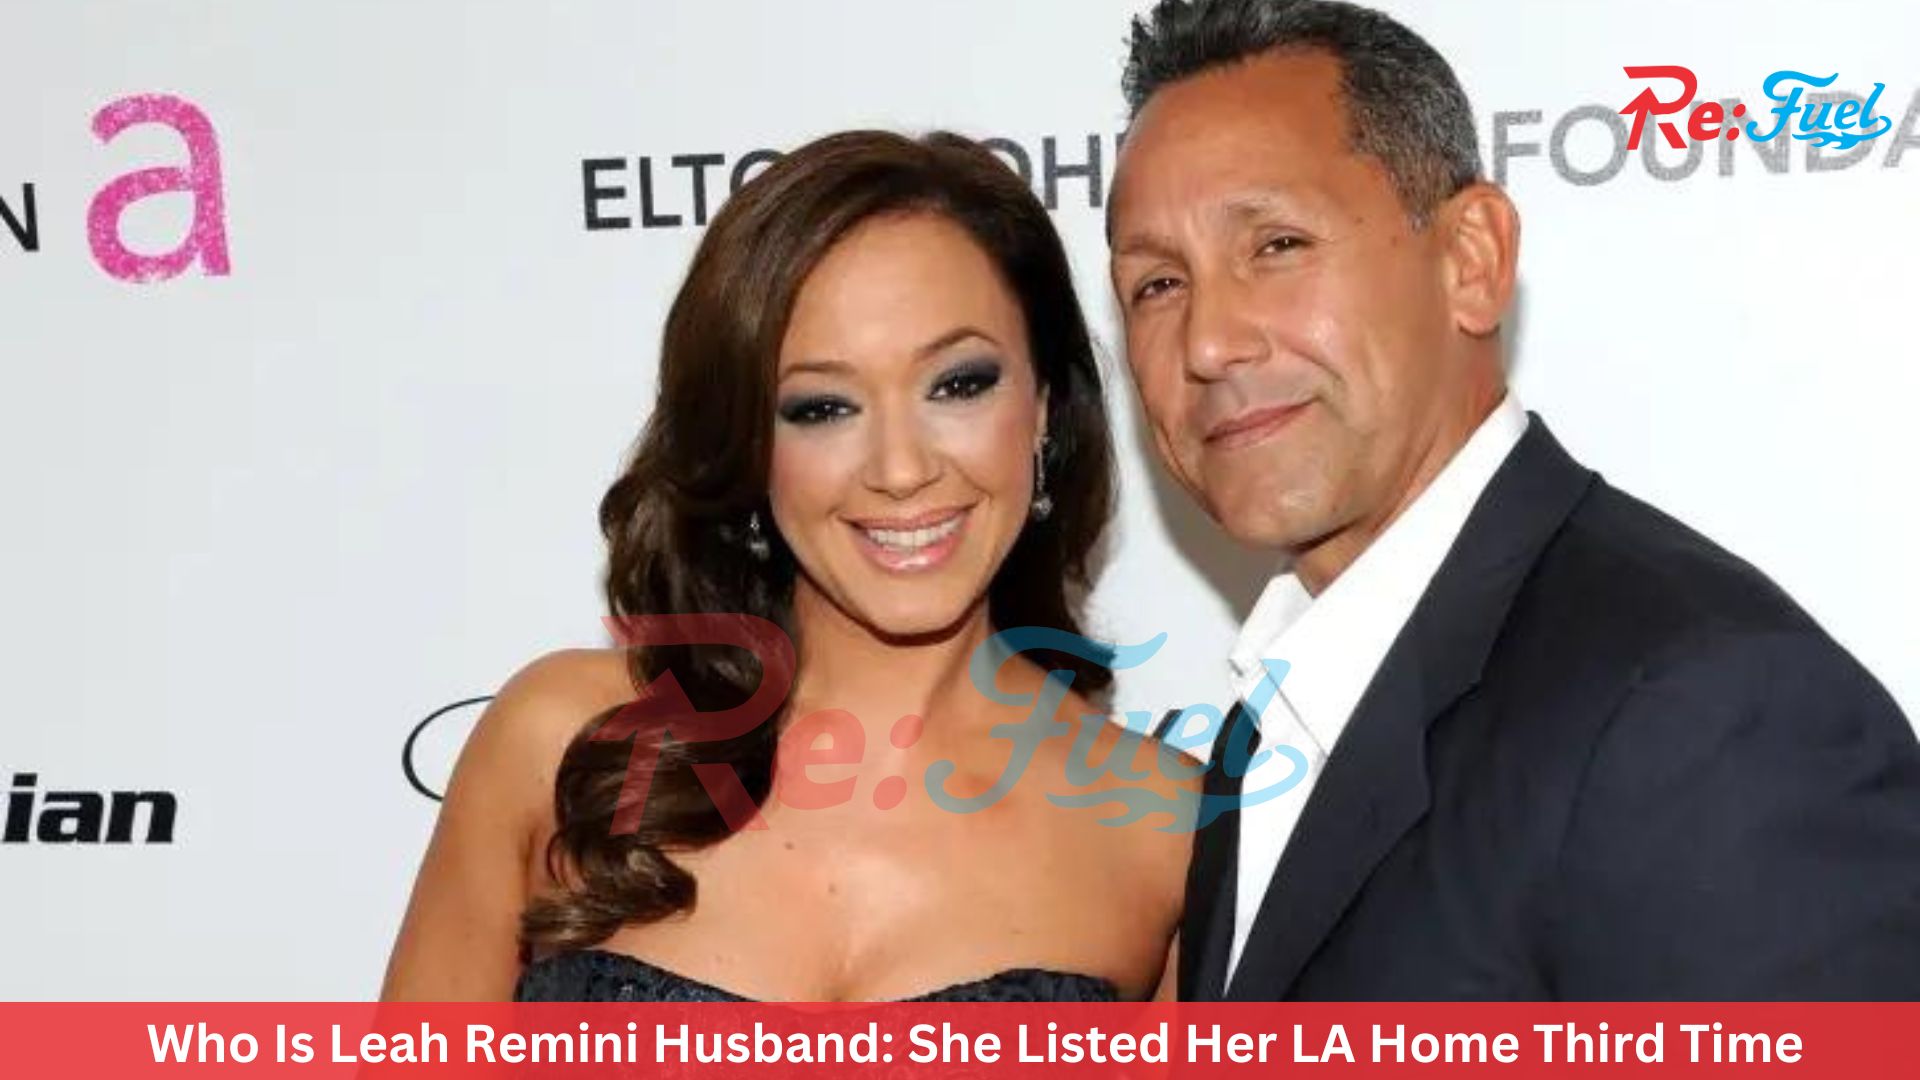 Who Is Leah Remini Husband: She Listed Her LA Home Third Time